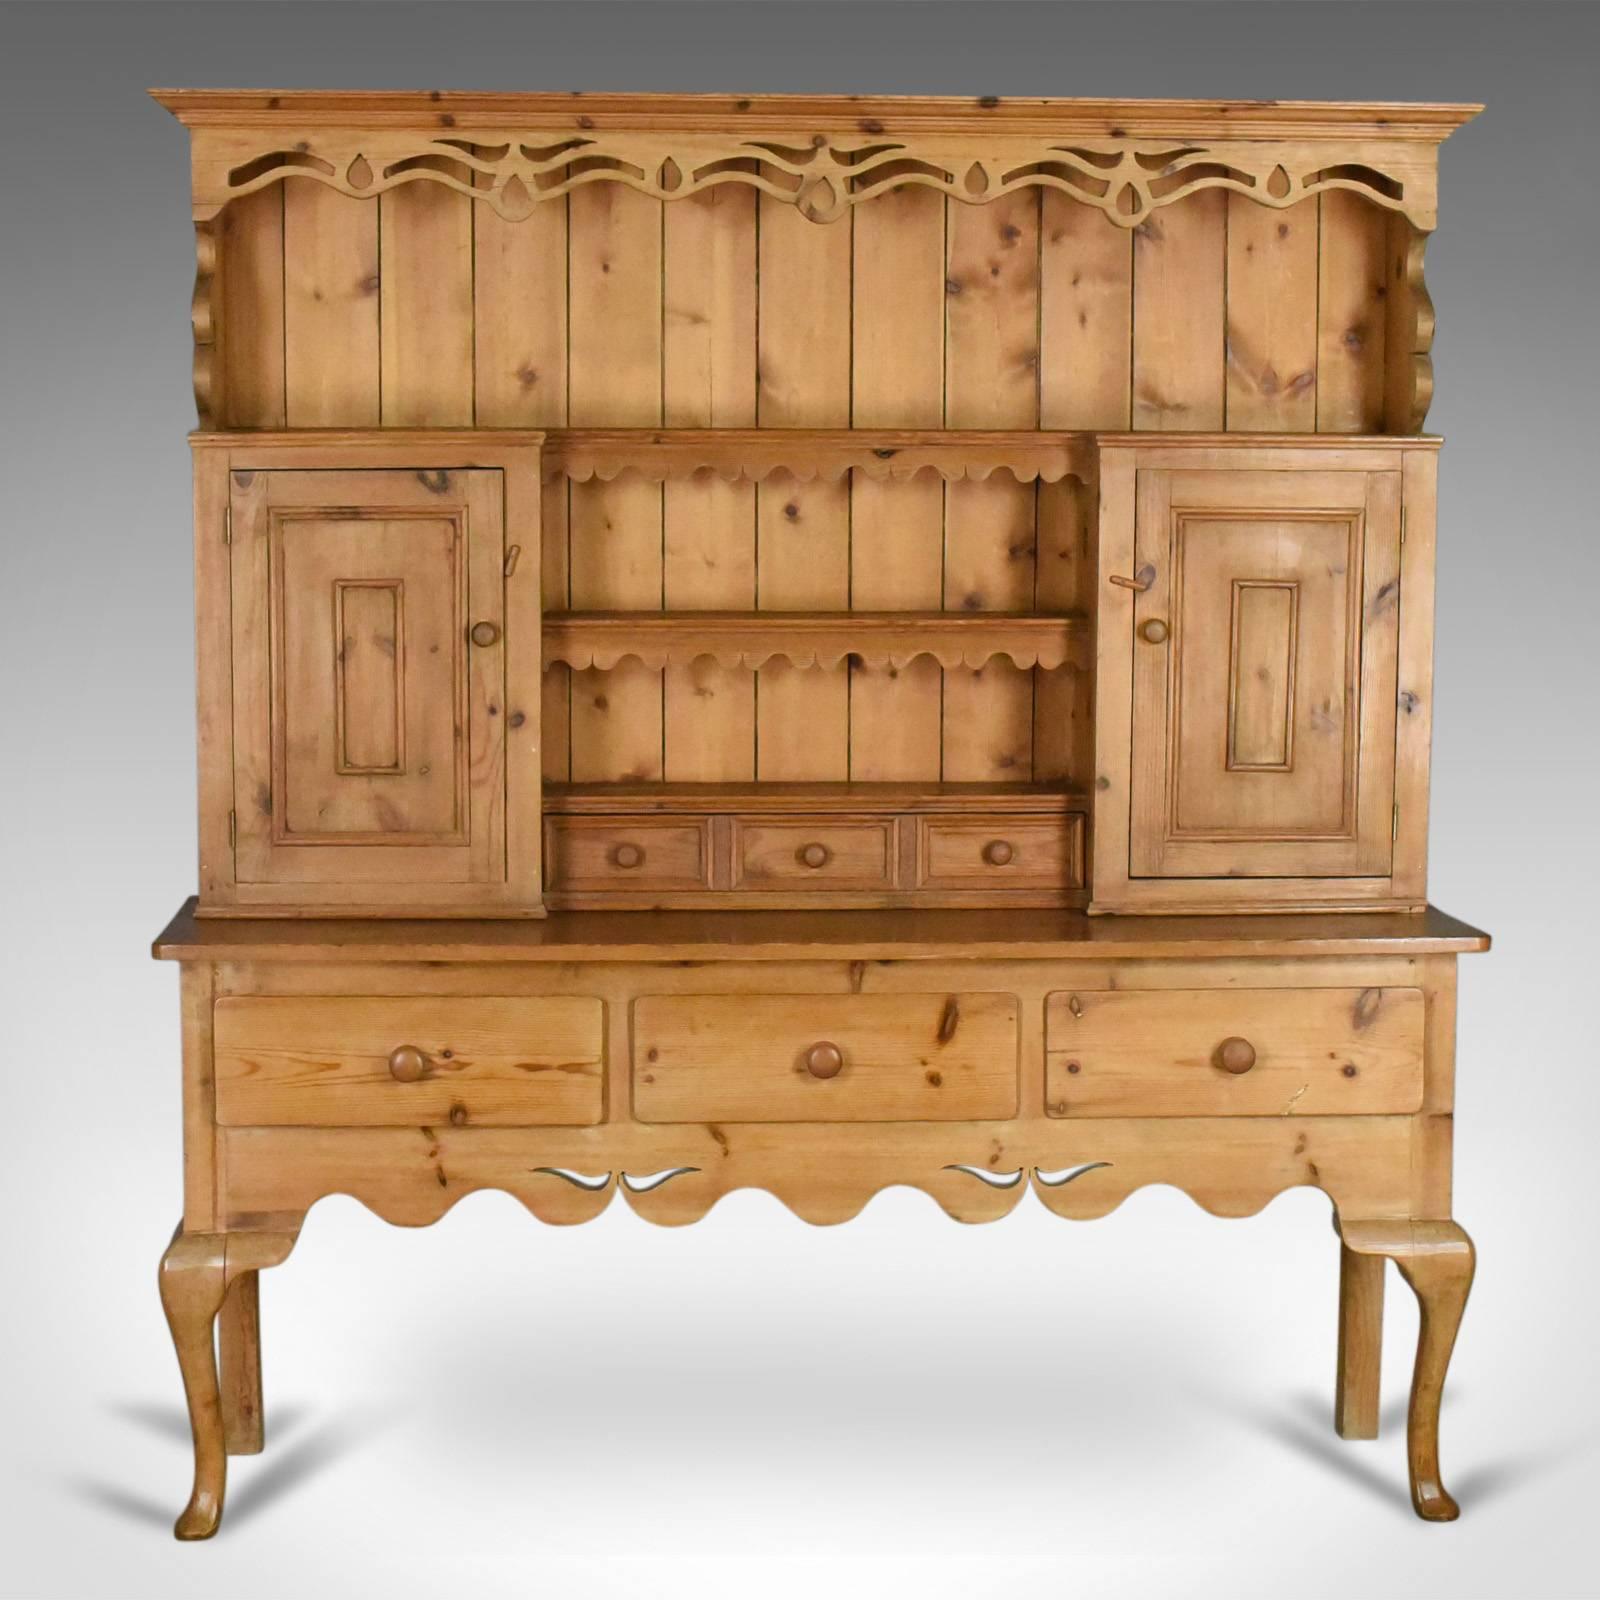 This is a large pine dresser in the Victorian taste, a country kitchen cabinet dating to the late 20th century.

Attractive honey hues in a waxed polished finish
Large proportions offering shelves, cupboards and drawer space
Featuring a tongue